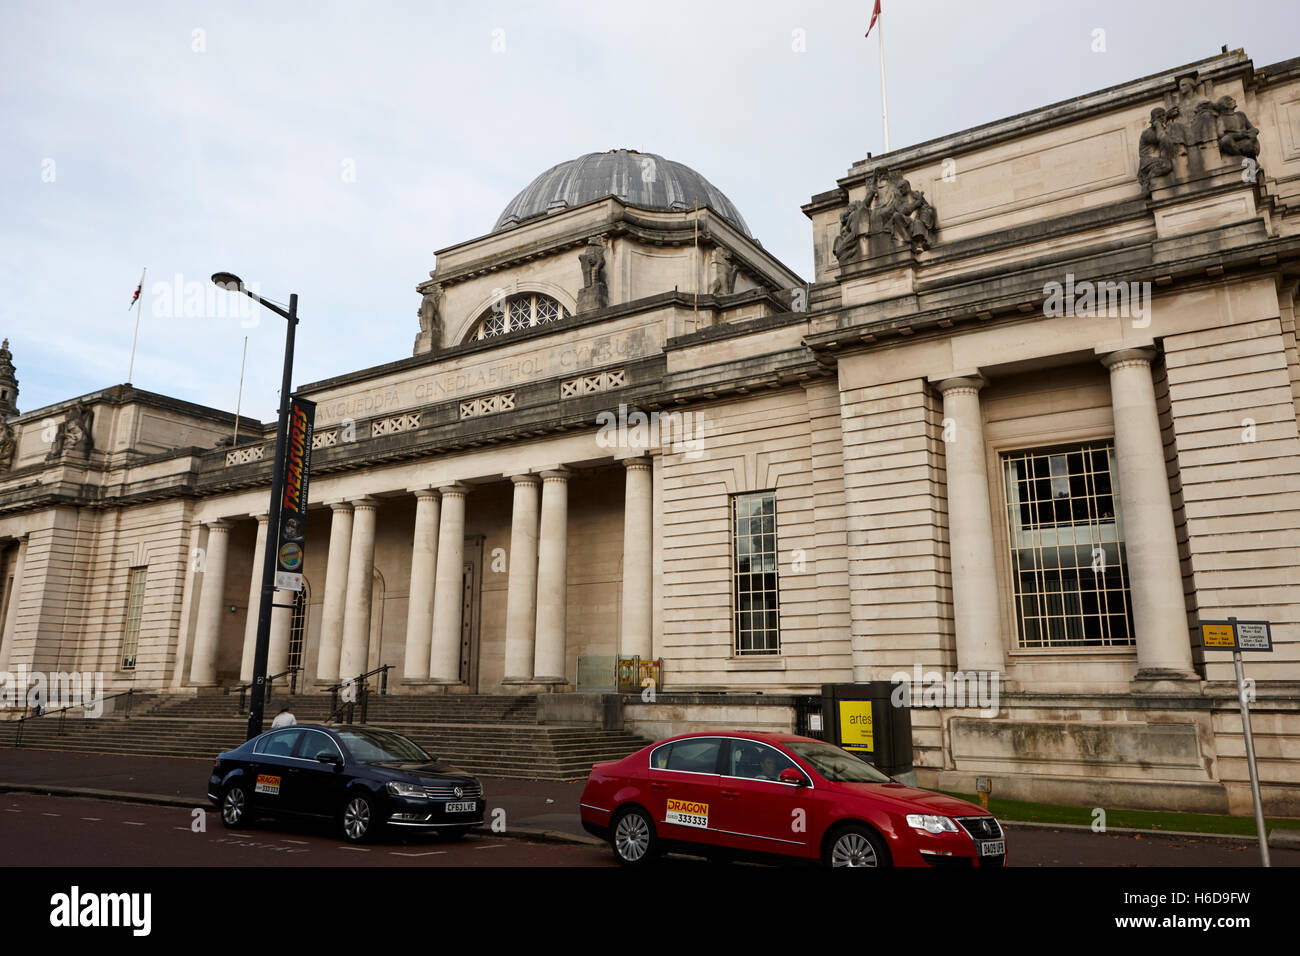 National Museum of Wales Cardiff Wales United Kingdom Banque D'Images